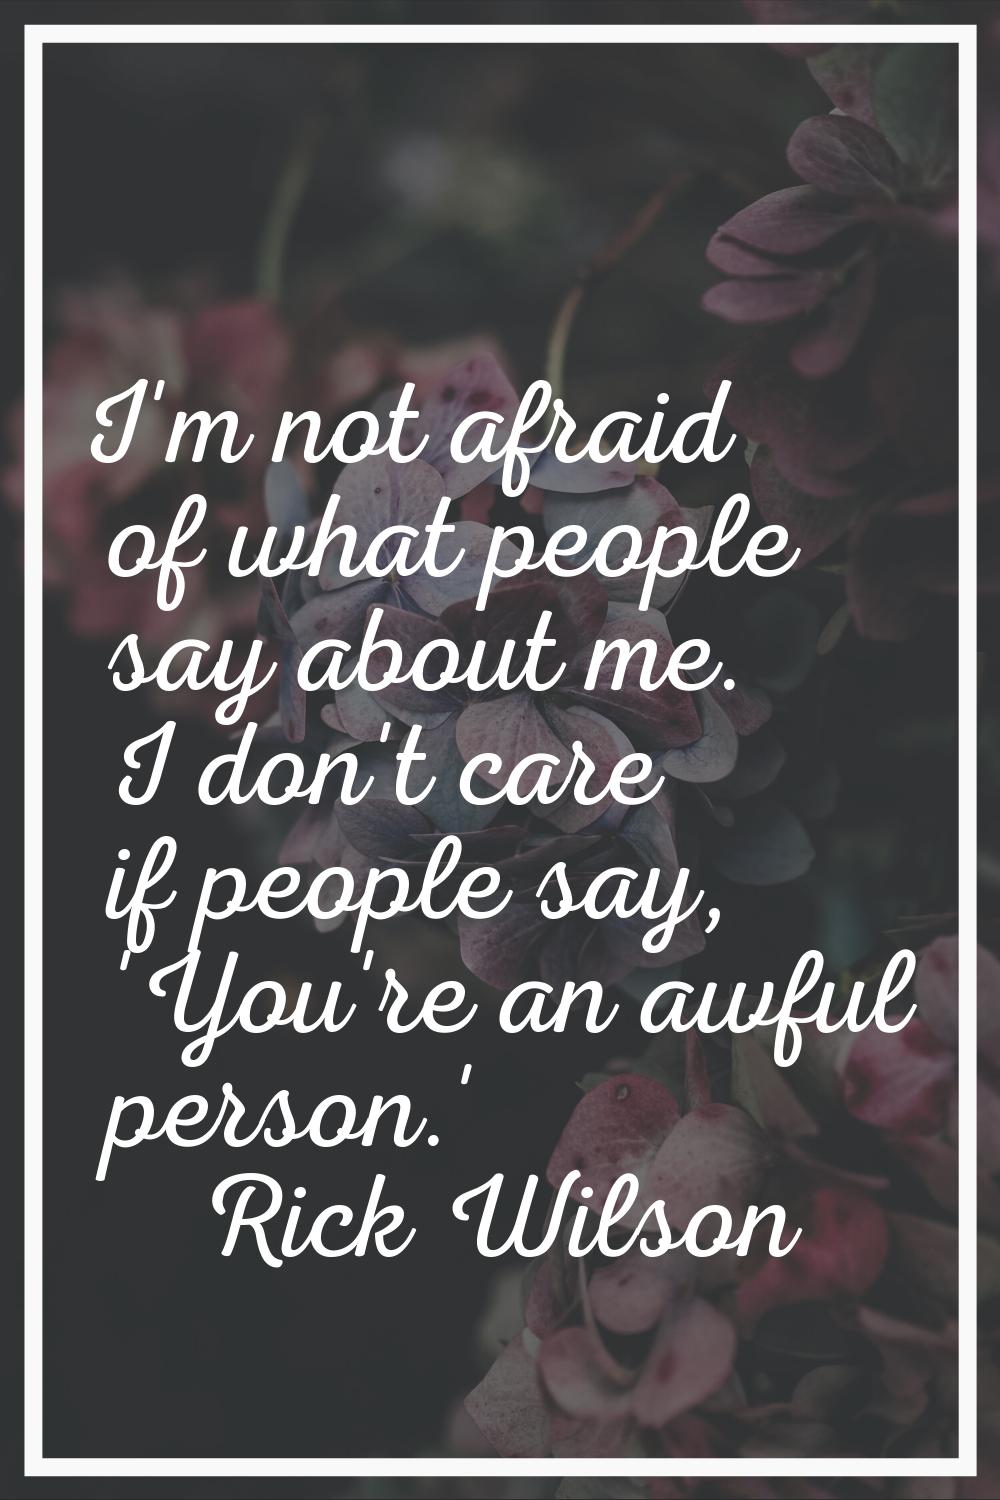 I'm not afraid of what people say about me. I don't care if people say, 'You're an awful person.'